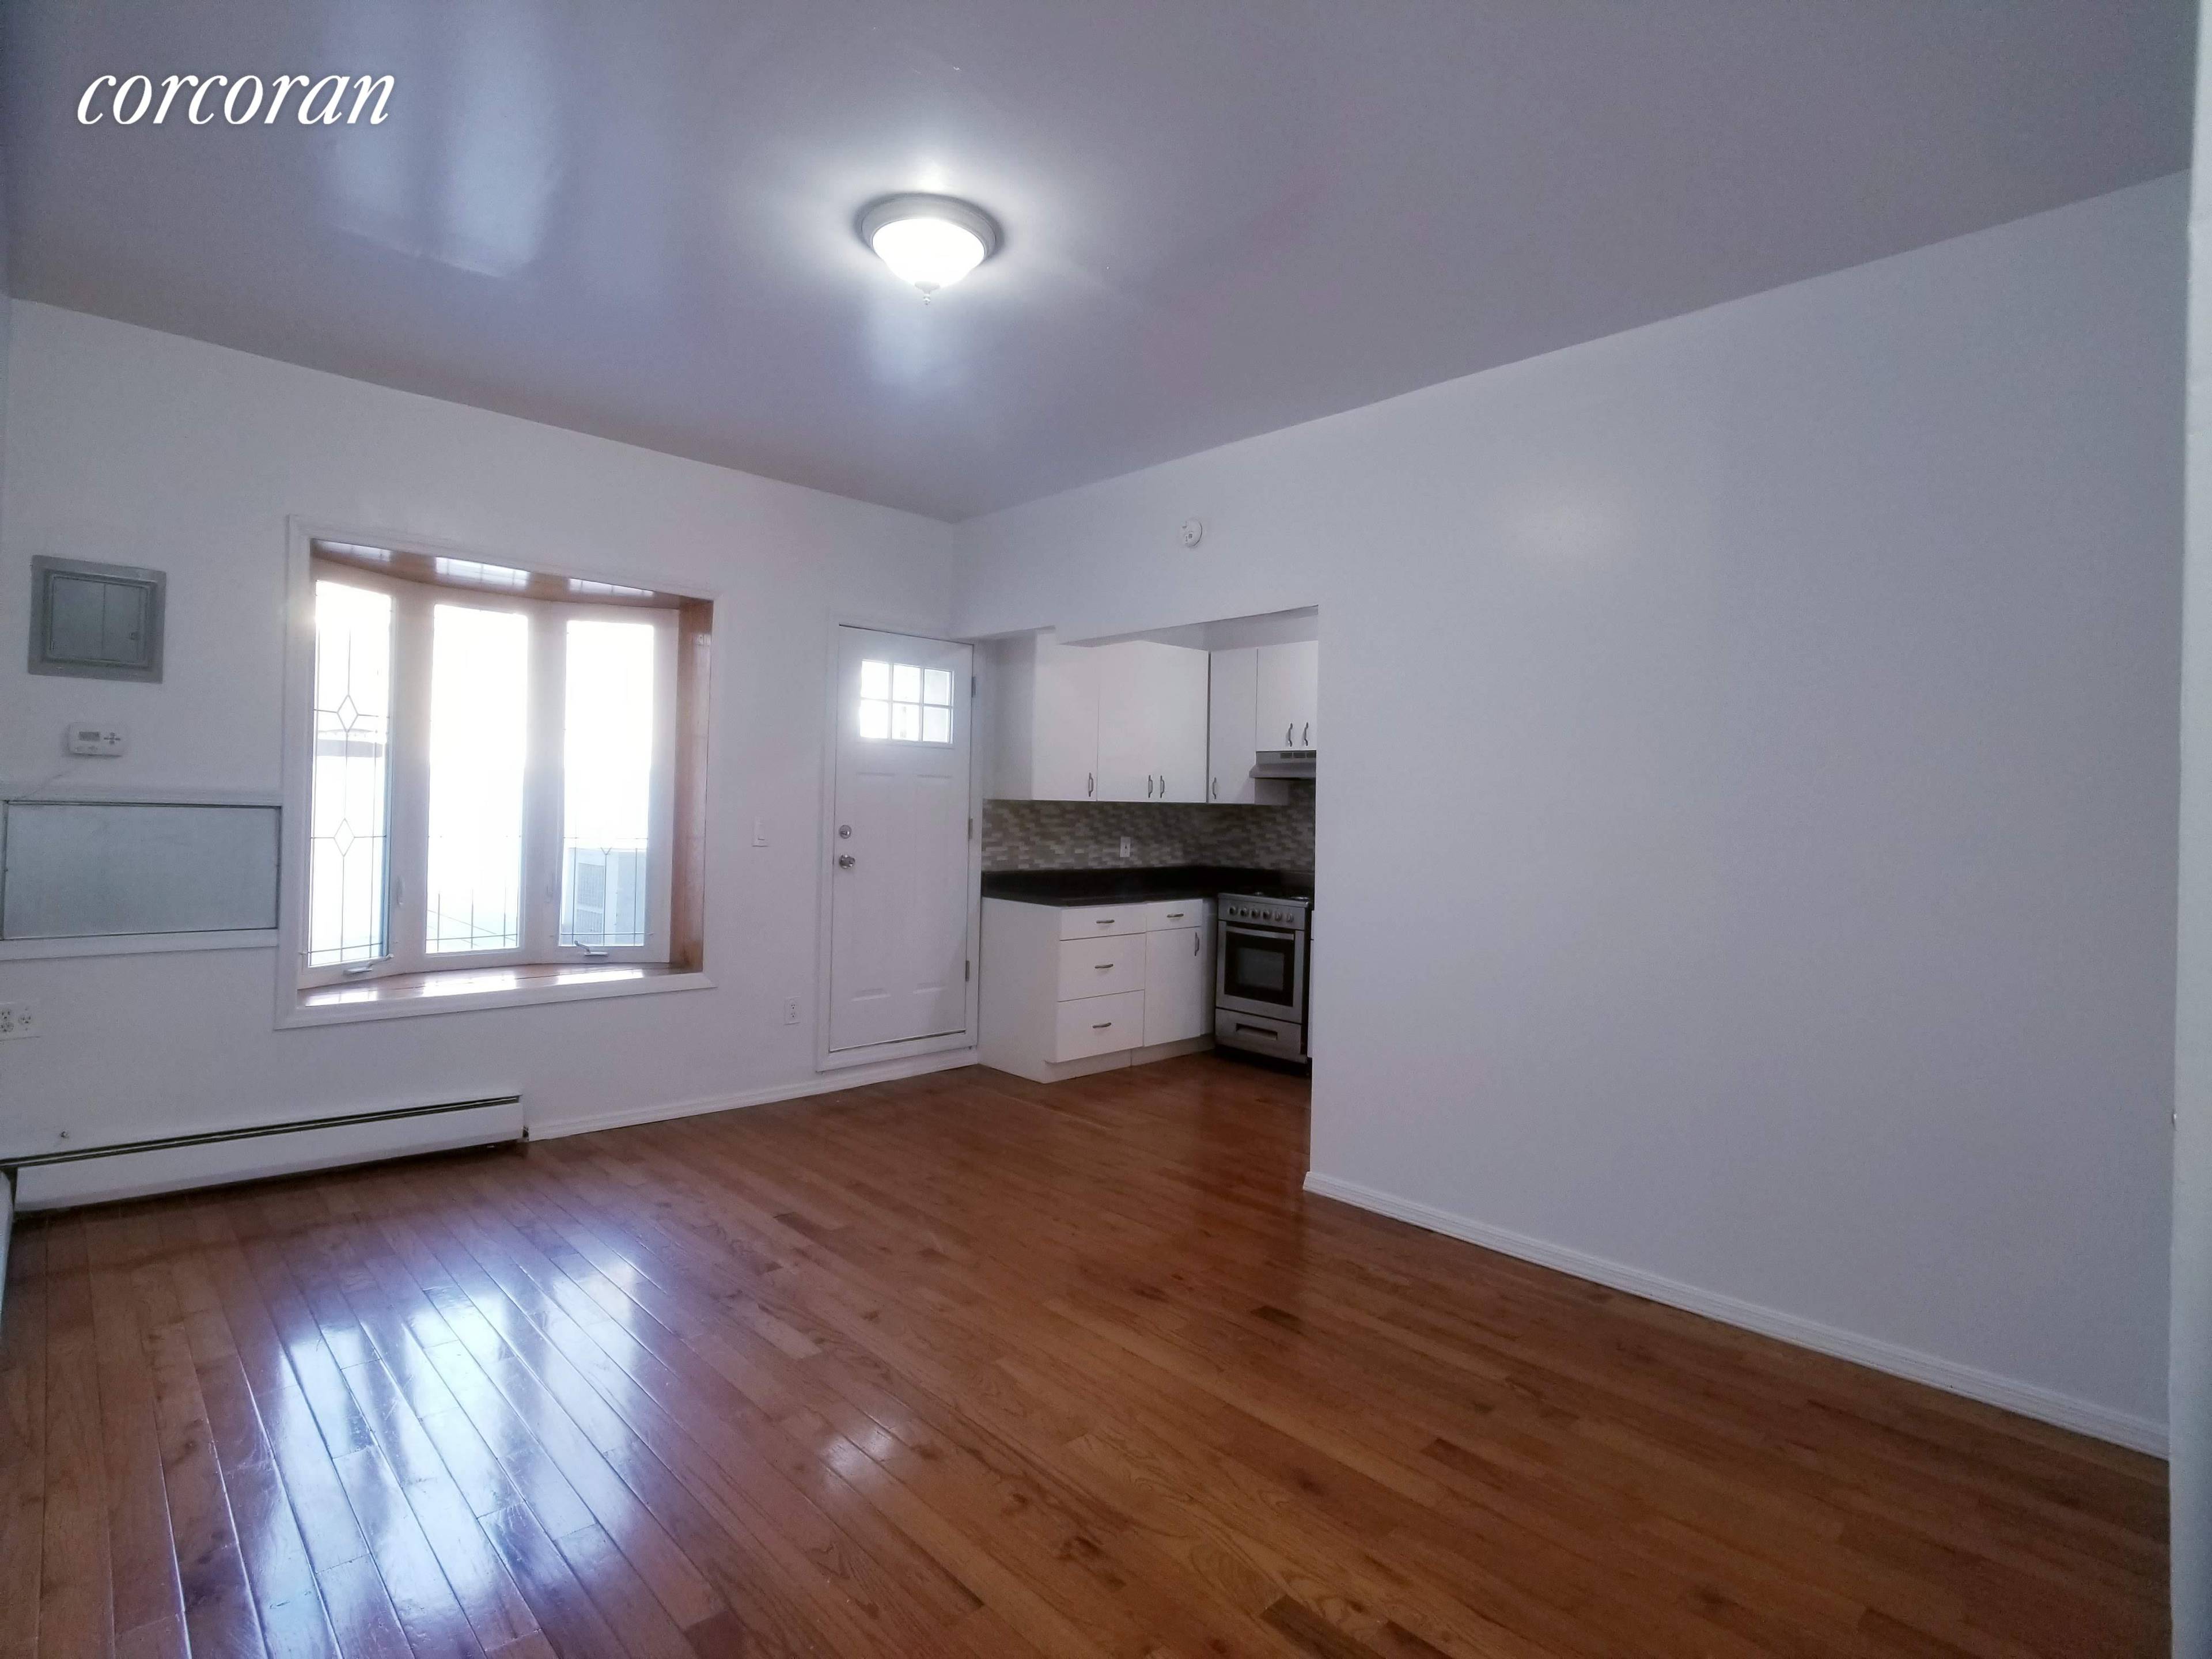 Fully renovated 2BR is located on the 2nd floor with a gigantic private roof deck.